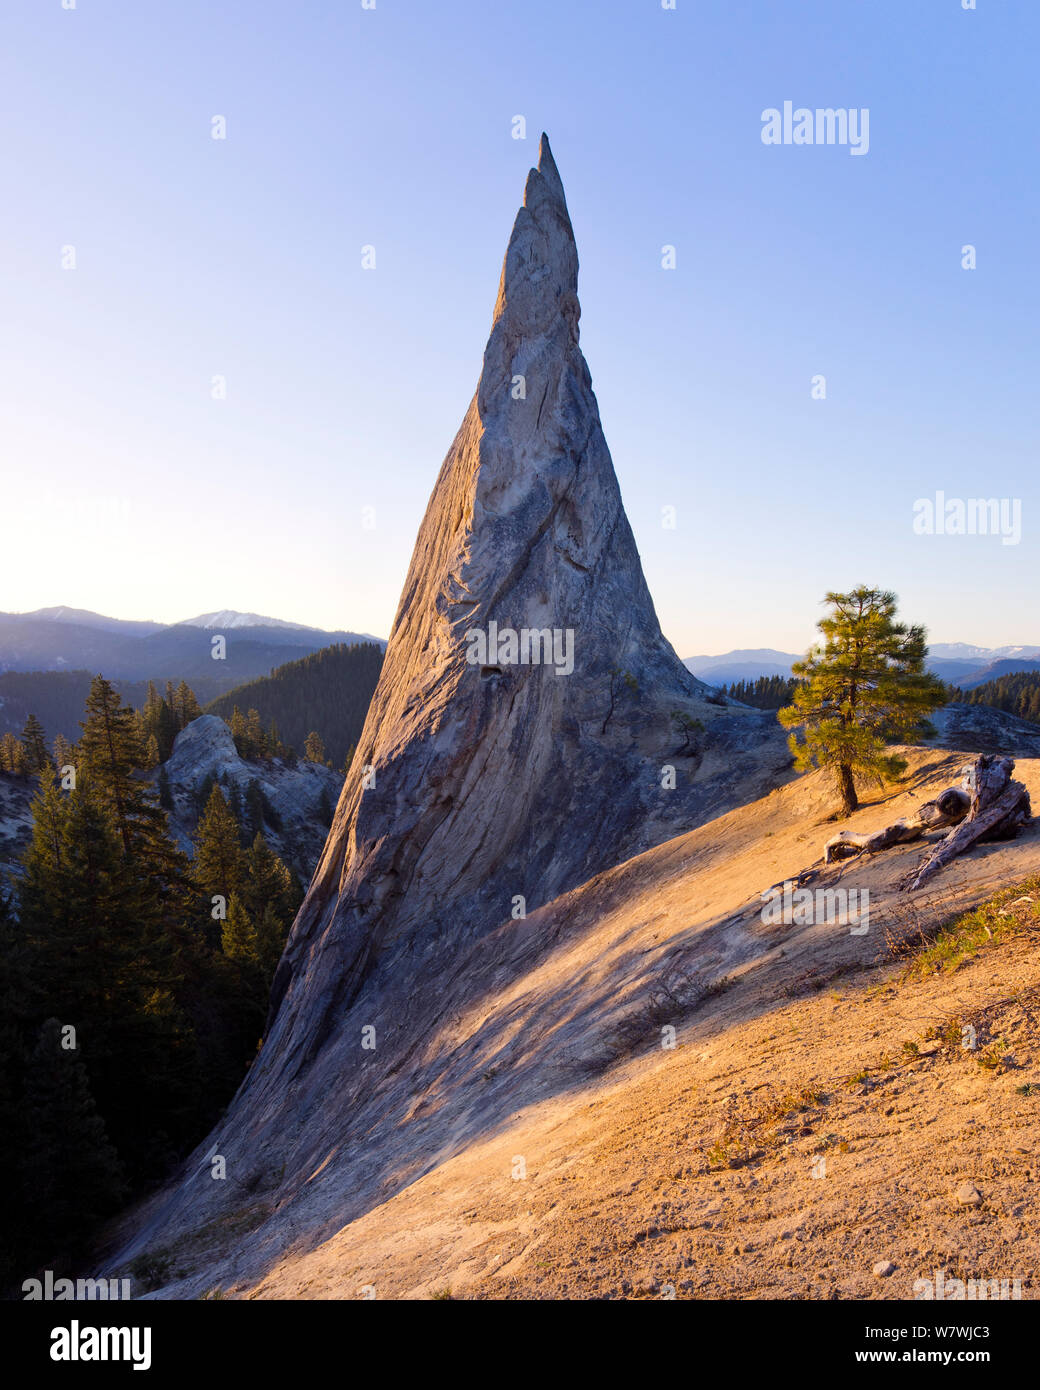 A stone spire at sunrise in the eastern Cascades of Washington, USA. April 2014. Stock Photo